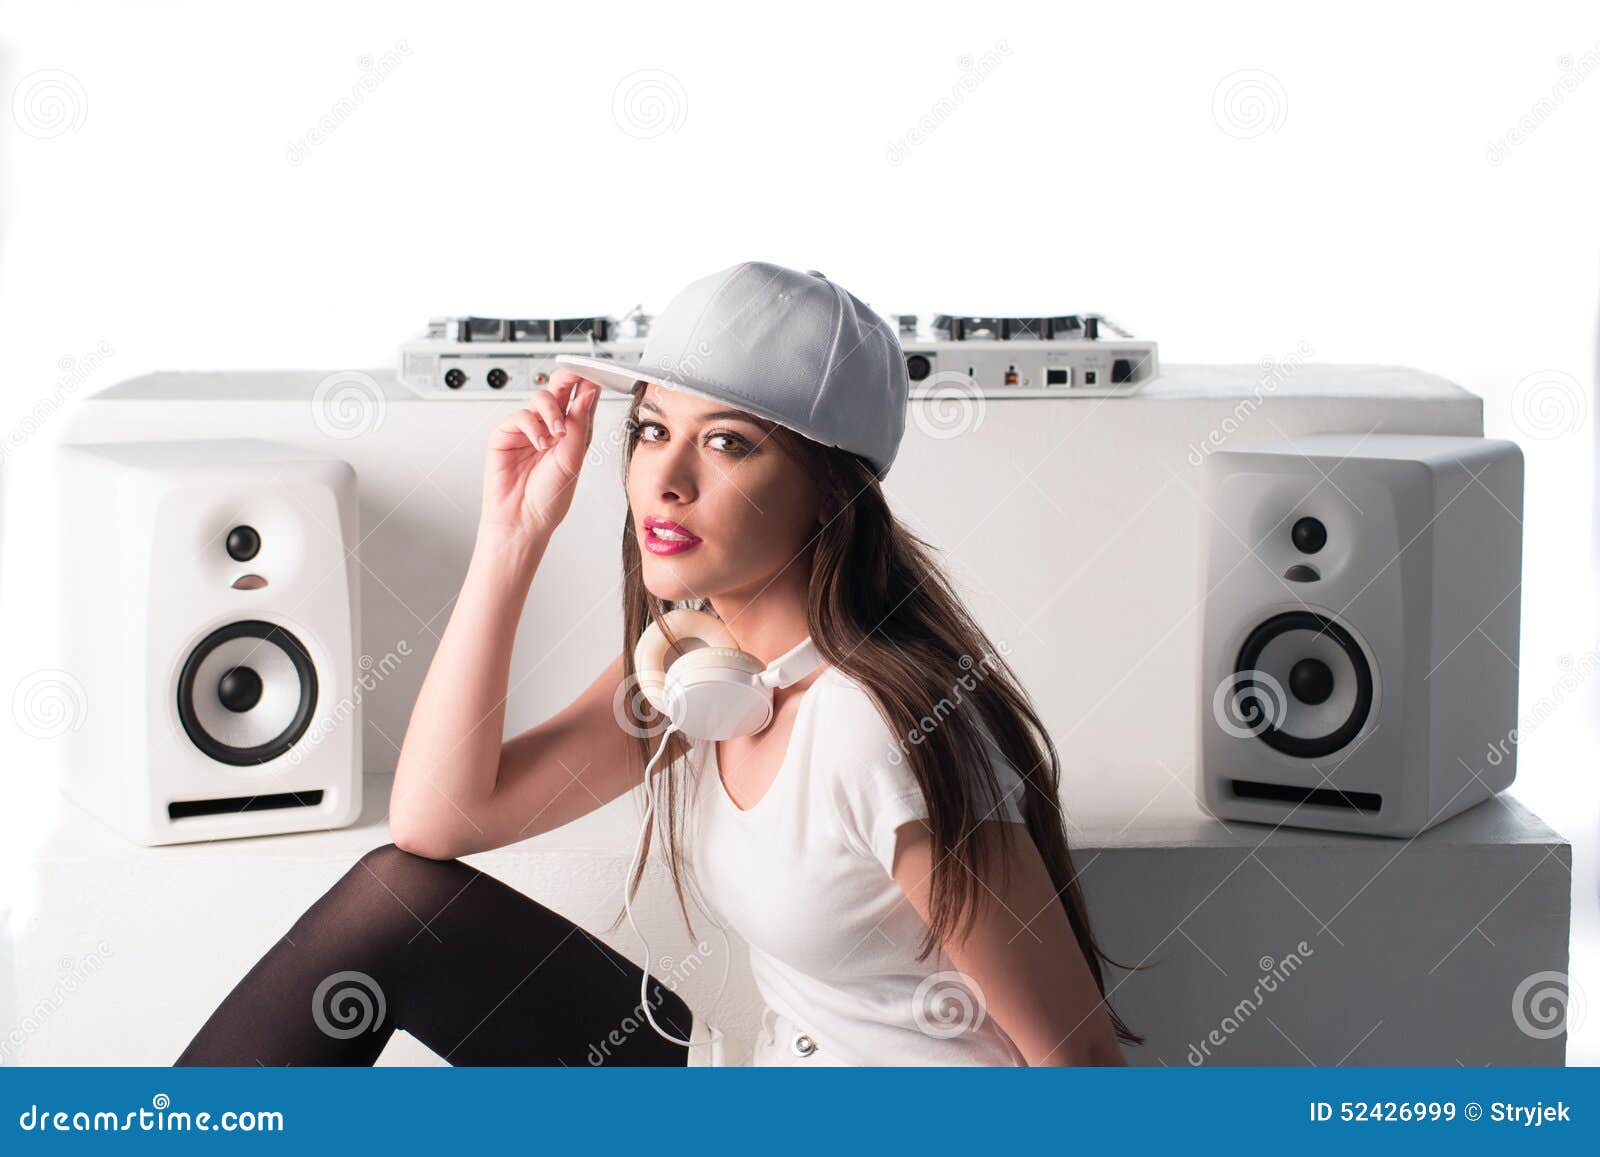 Trendy Dj Dressed In White Mixing Music Stock Image Image Of Stereo Friendly 52426999 